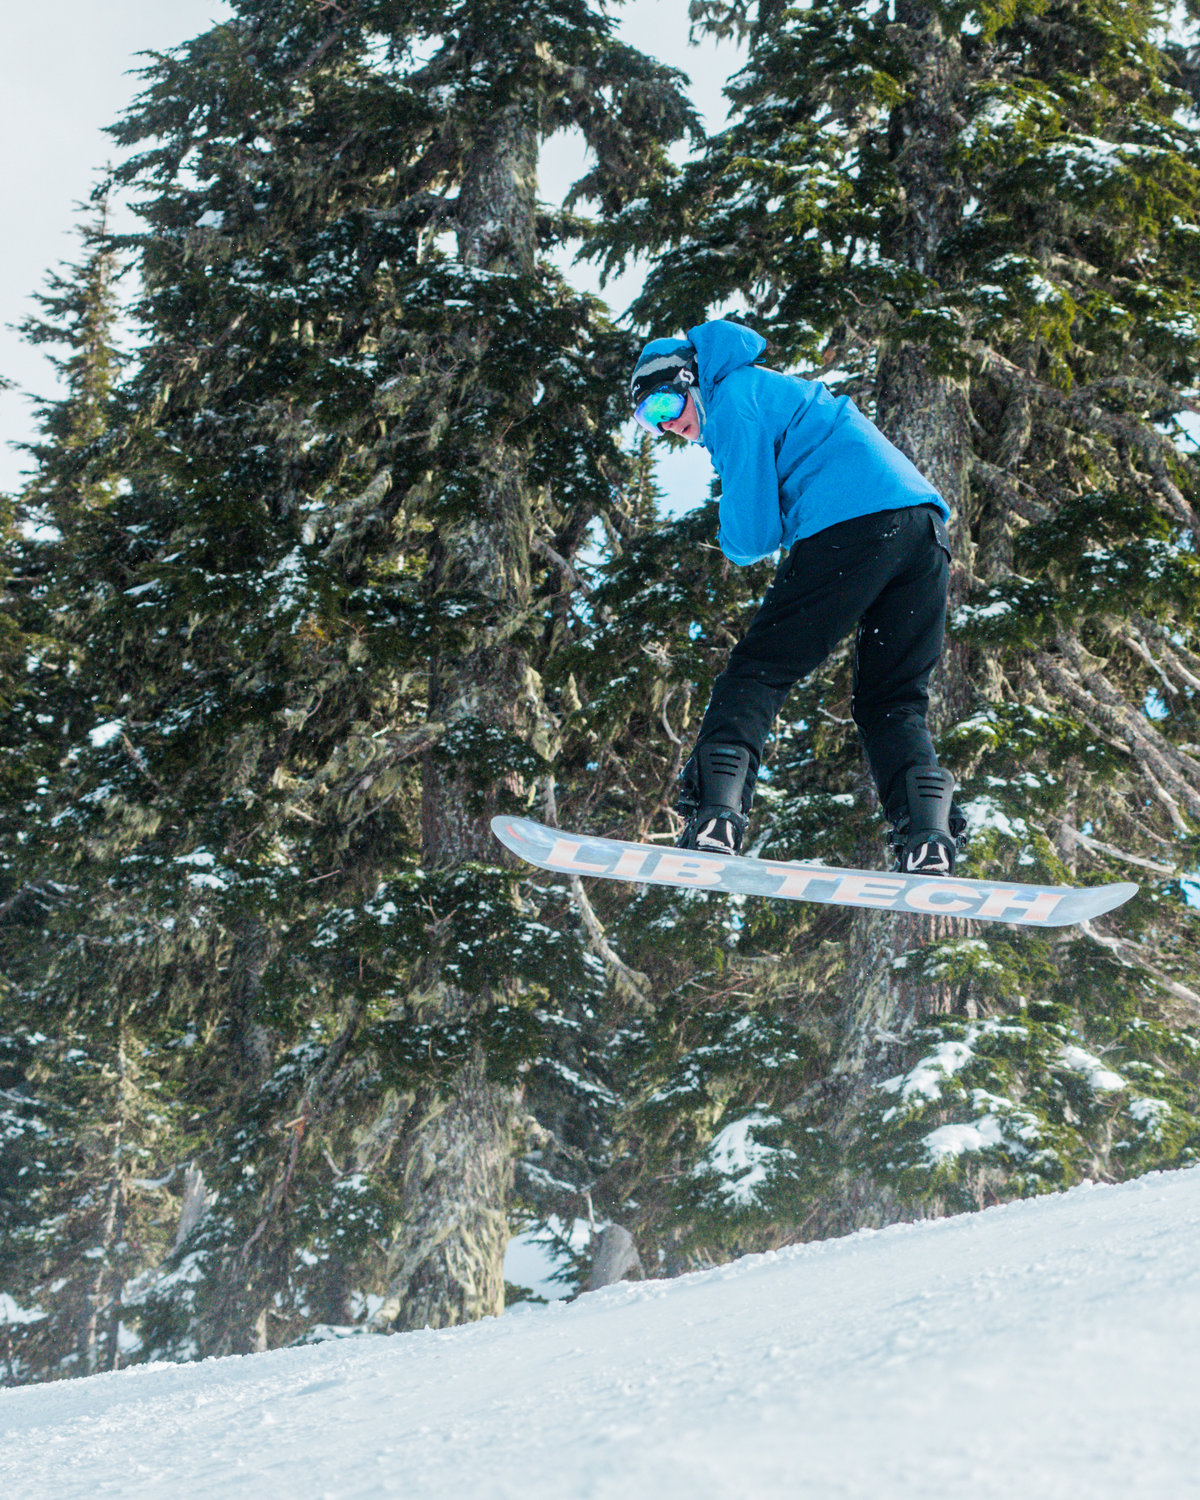 A snowboarder takes air inside the White Pass Ski Area on Sunday.